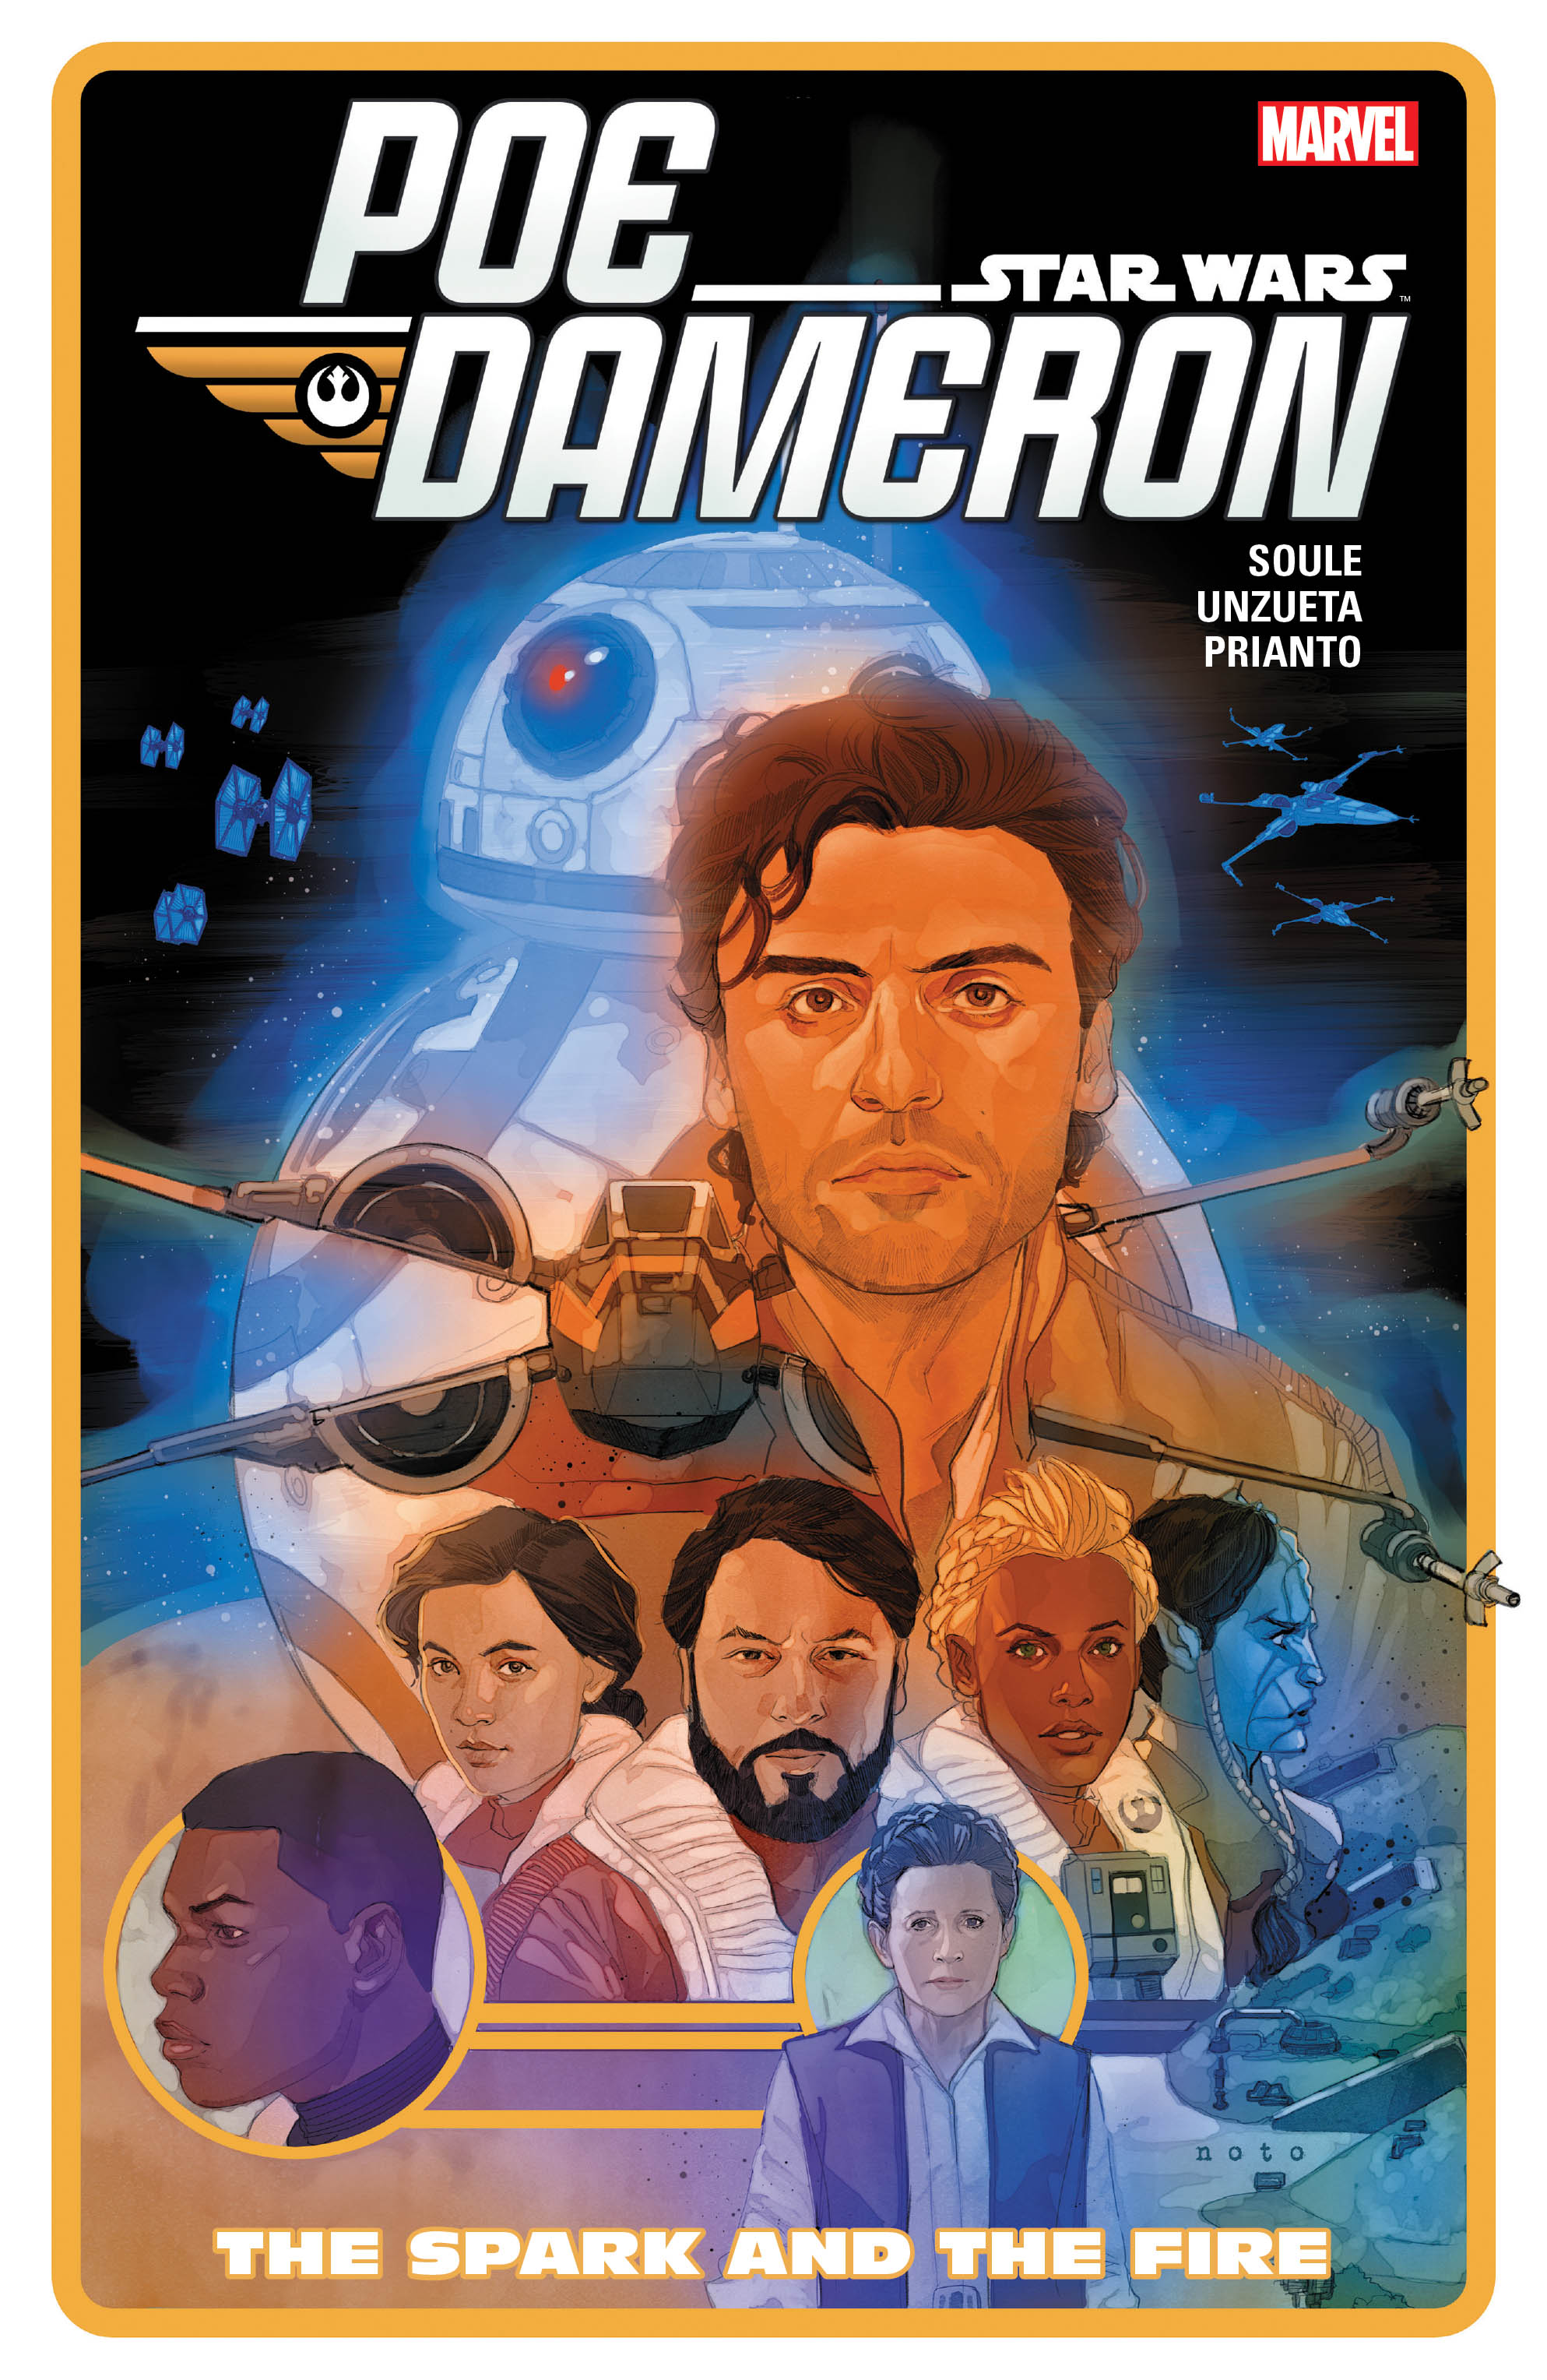 Star Wars: Poe Dameron Vol. 5 - The Spark and the Fire (Trade Paperback)